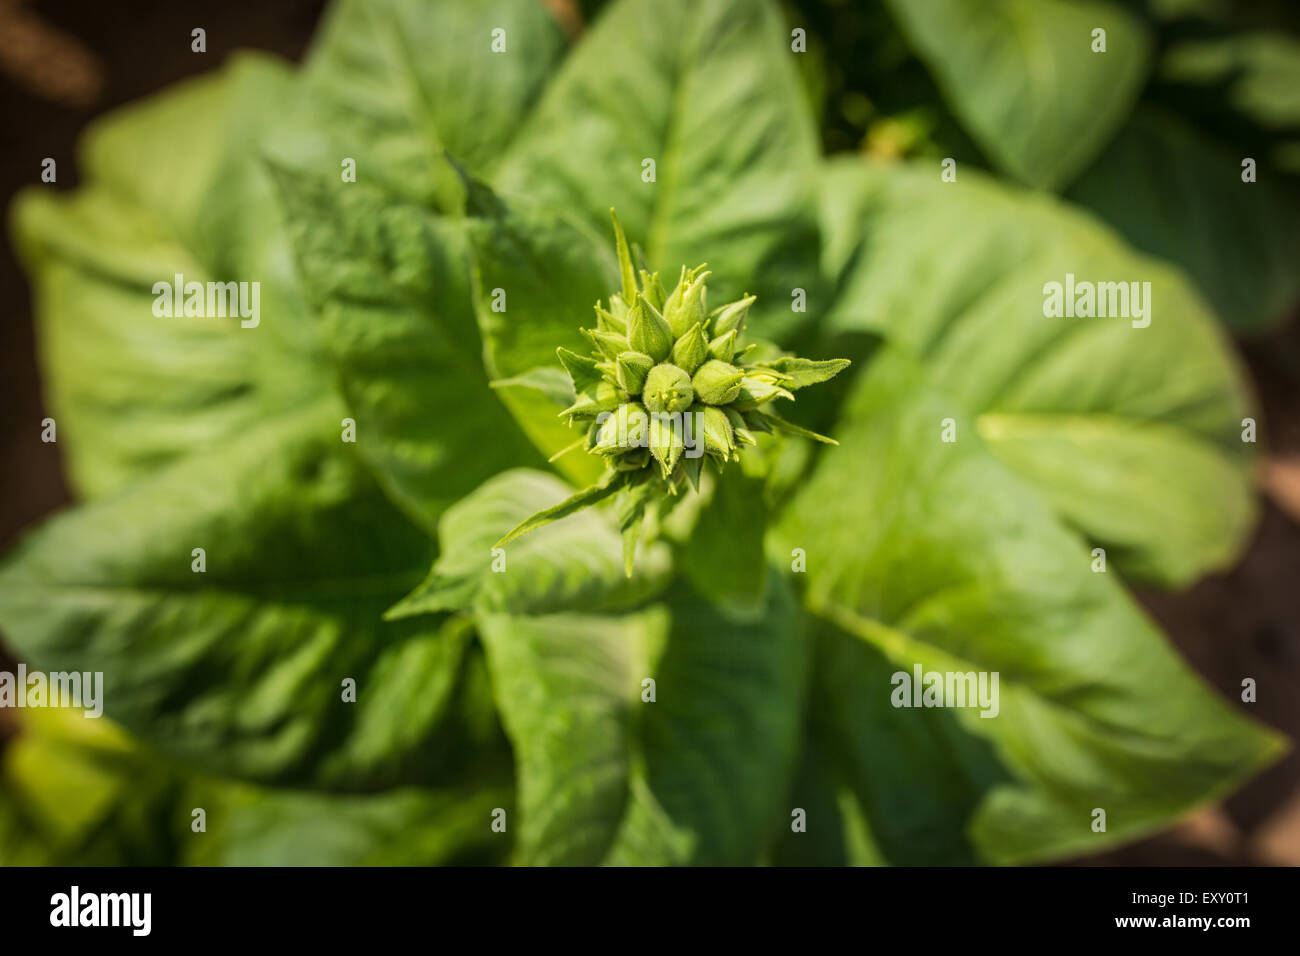 tobacco plantation on agricultural farm land Stock Photo